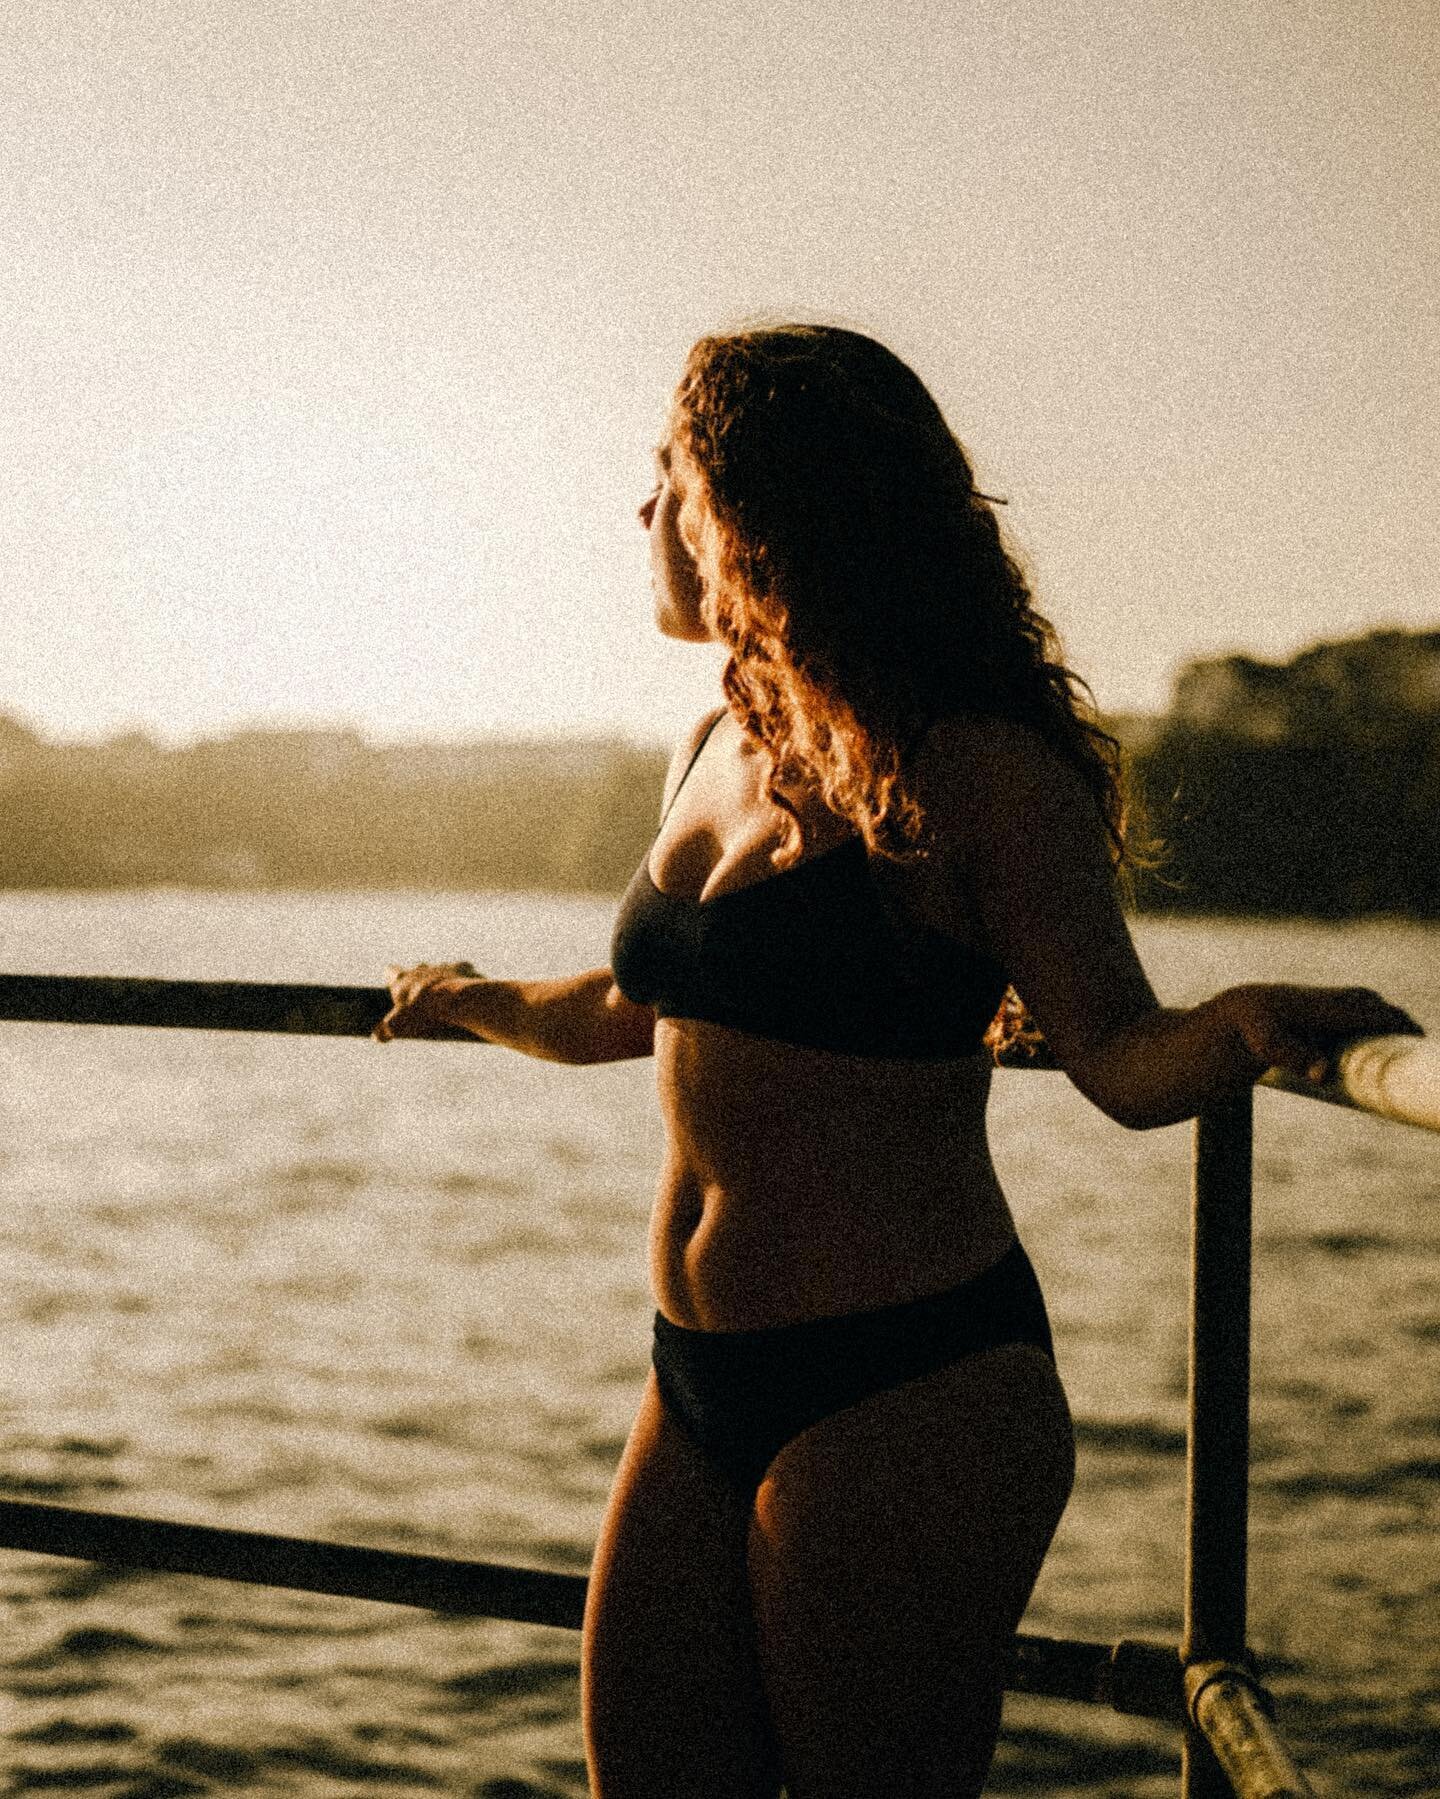 Enchanted silence of a sunrise.
The mirrored gaze, in soft, misty, dawning rays
Our radiance of living colours 
Drinking a drop from the ocean of nectar

Swimmer: @maddyjonees 
Photographer: @_momentsbetween 

#coldwaterswimming #coldwaterswimminguk 